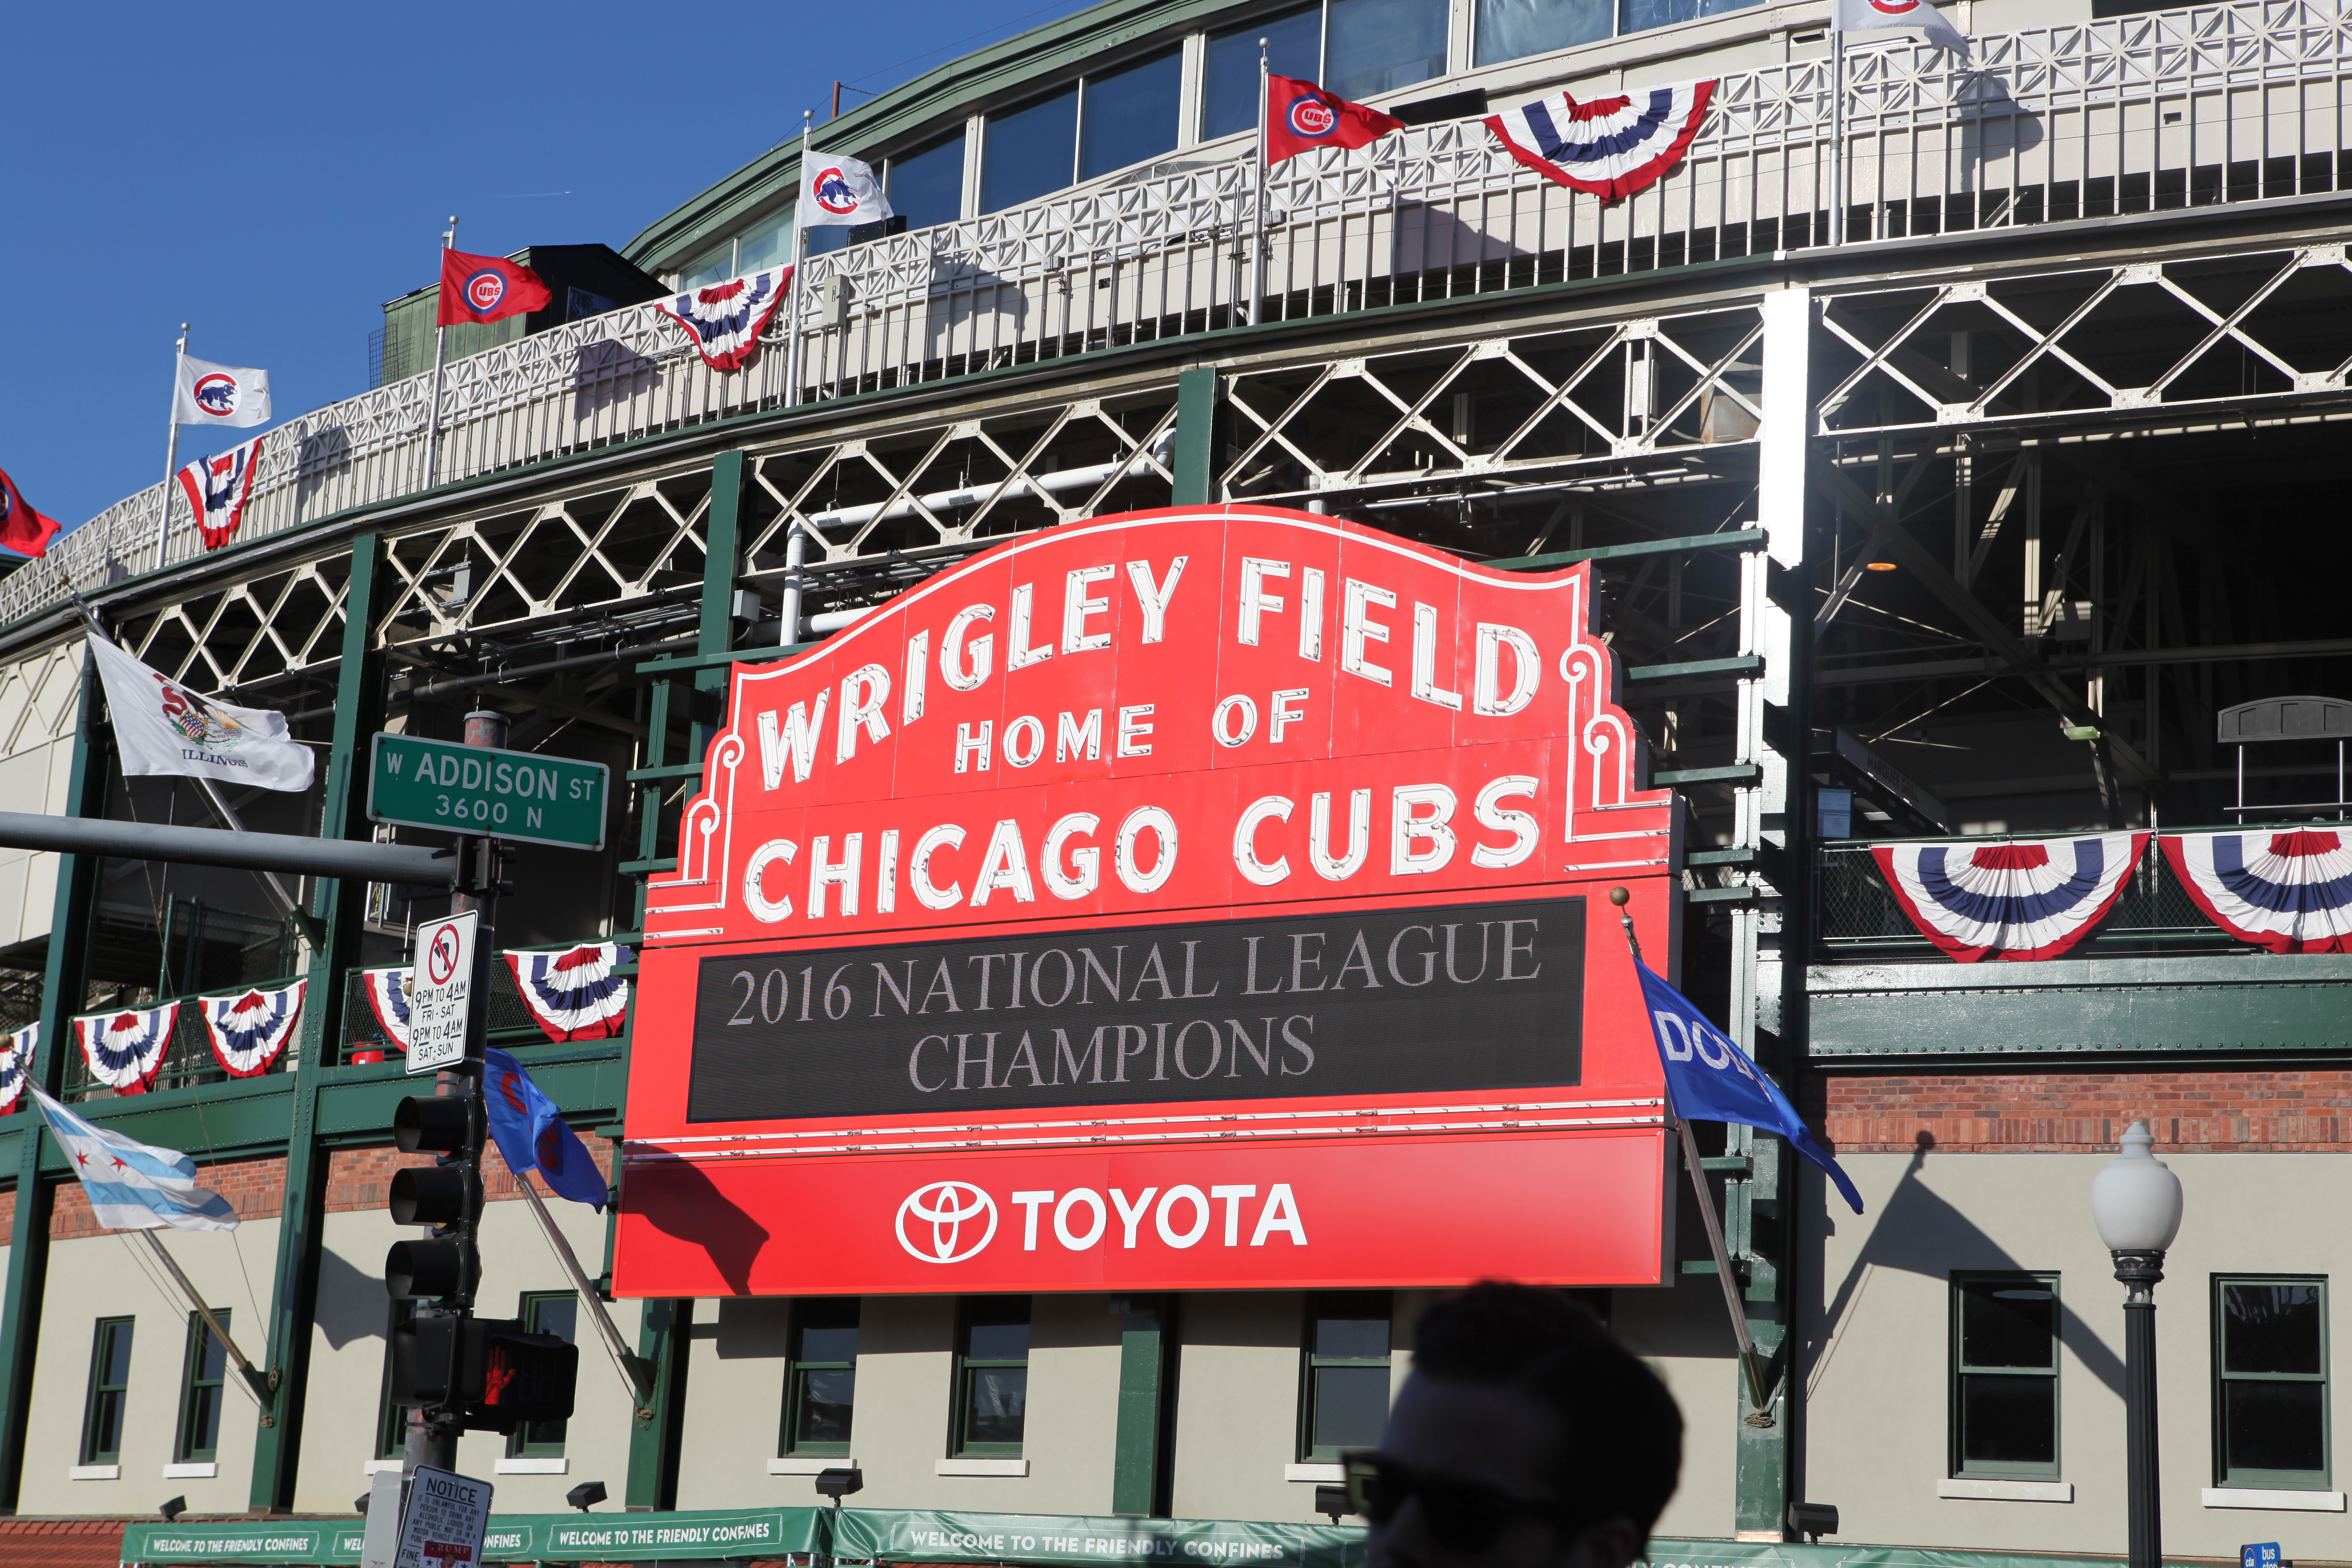 A red sign above the baseball field’s entrance reads: Wrigley Field Home of the Chicago Cubs.